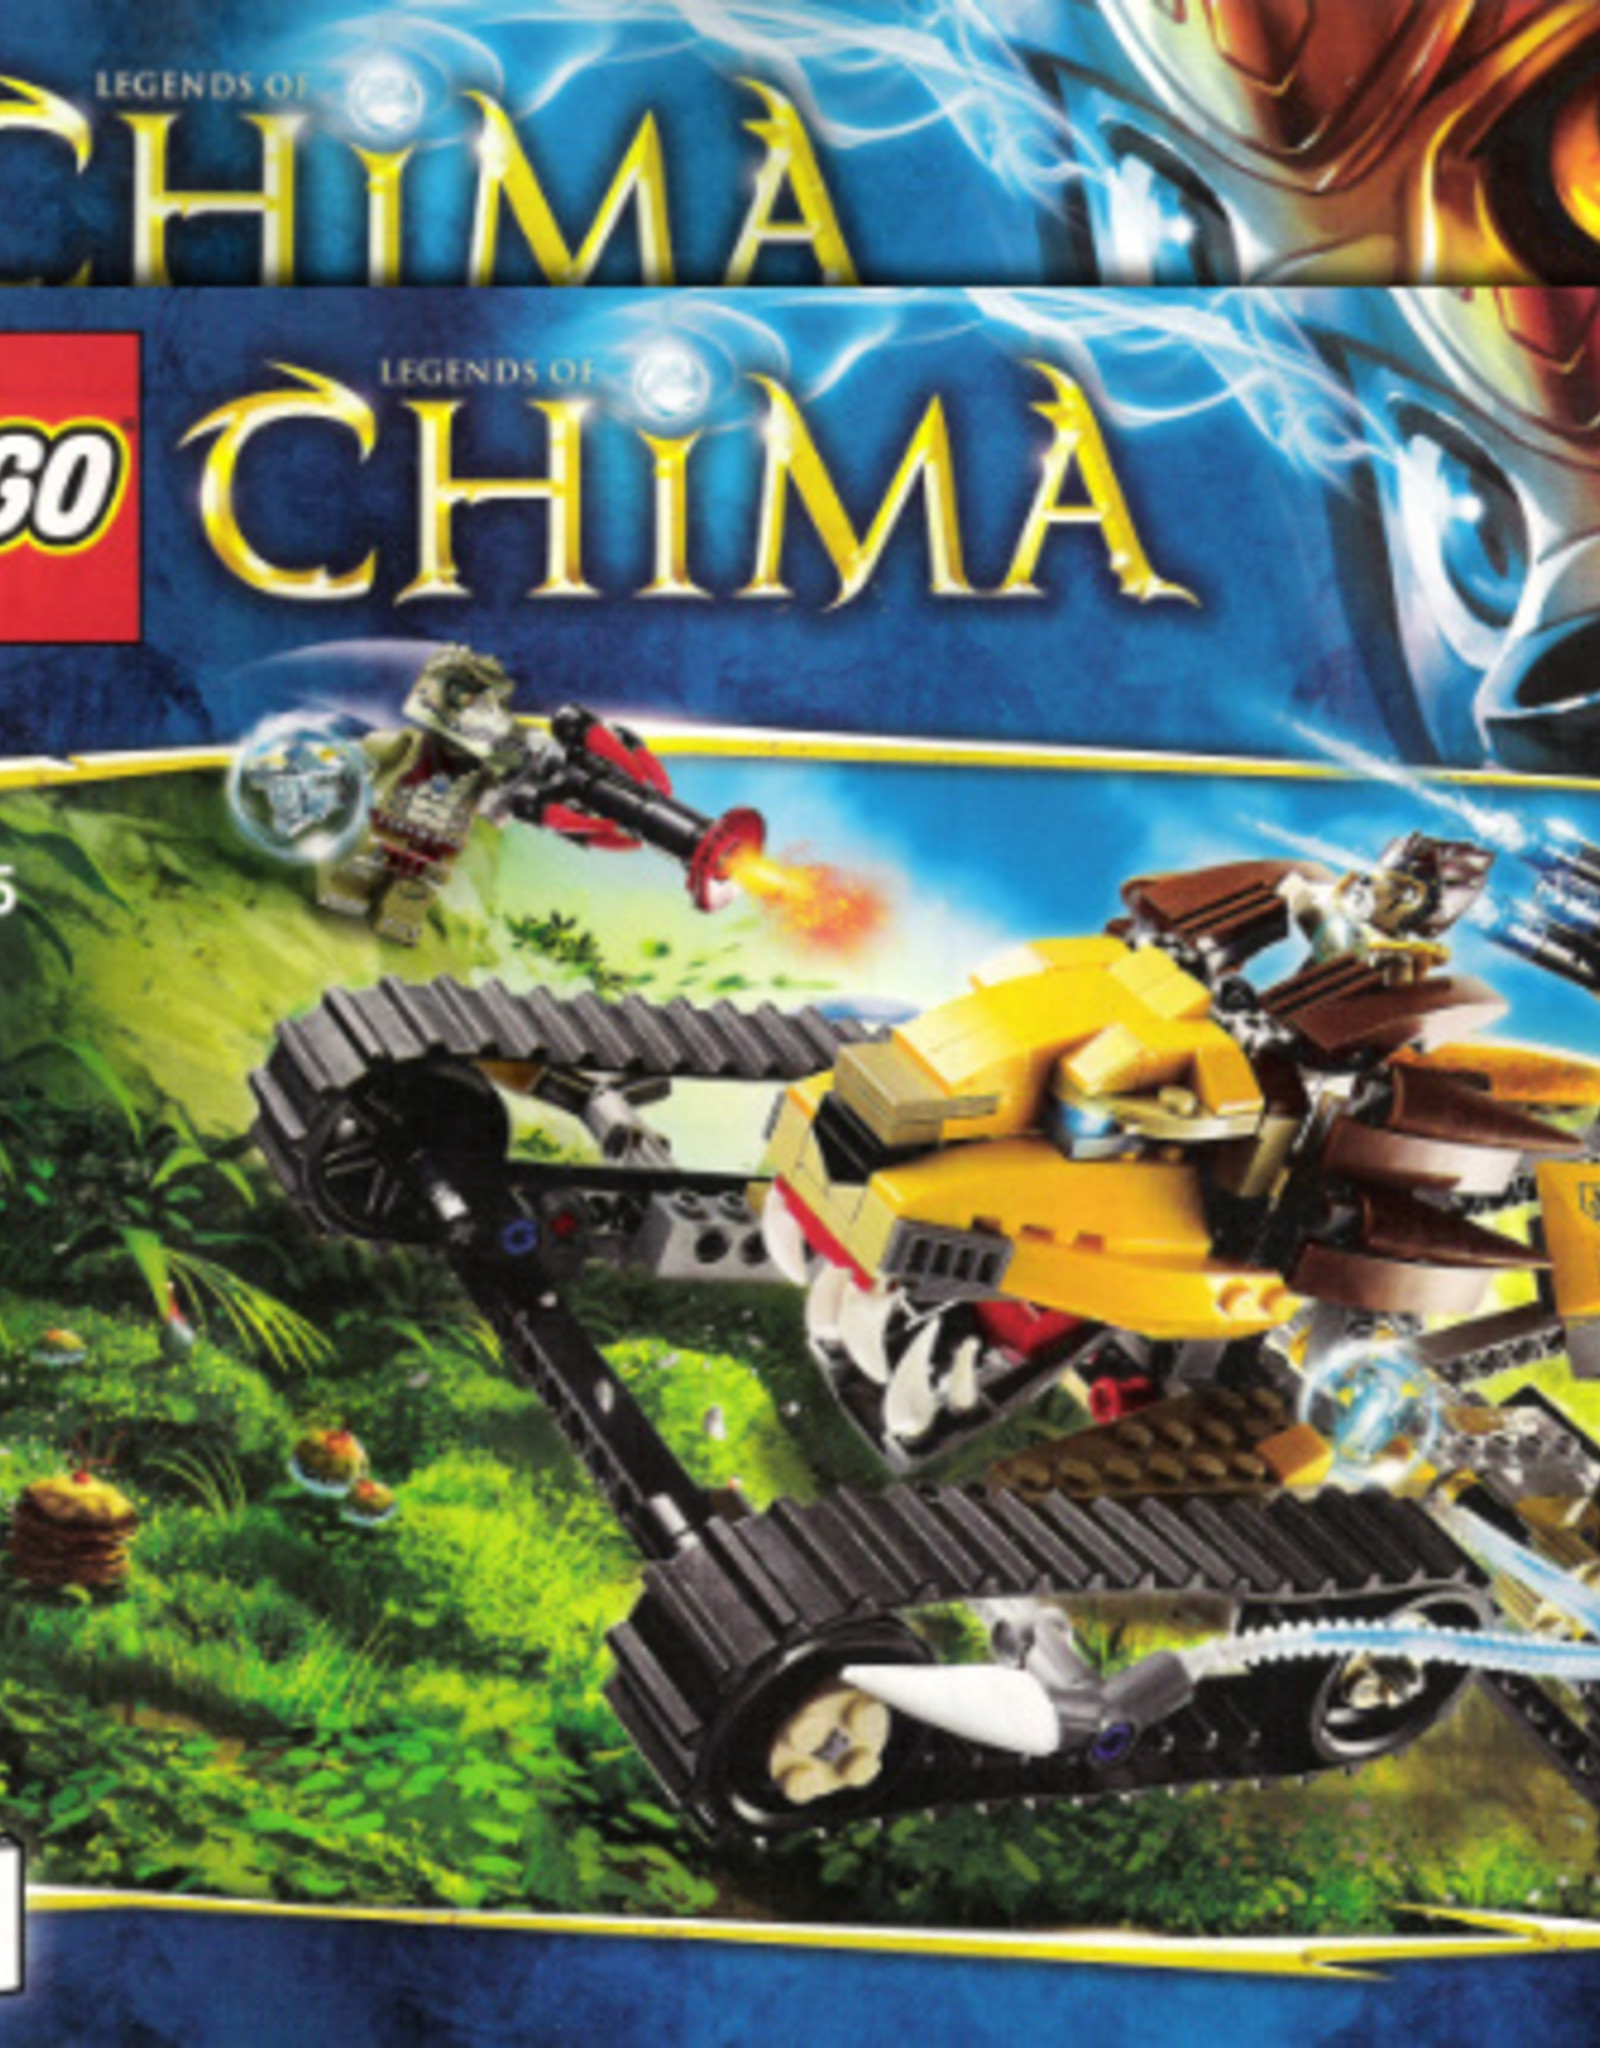 LEGO LEGO 70005 laval's Royal Fighter CHIMA